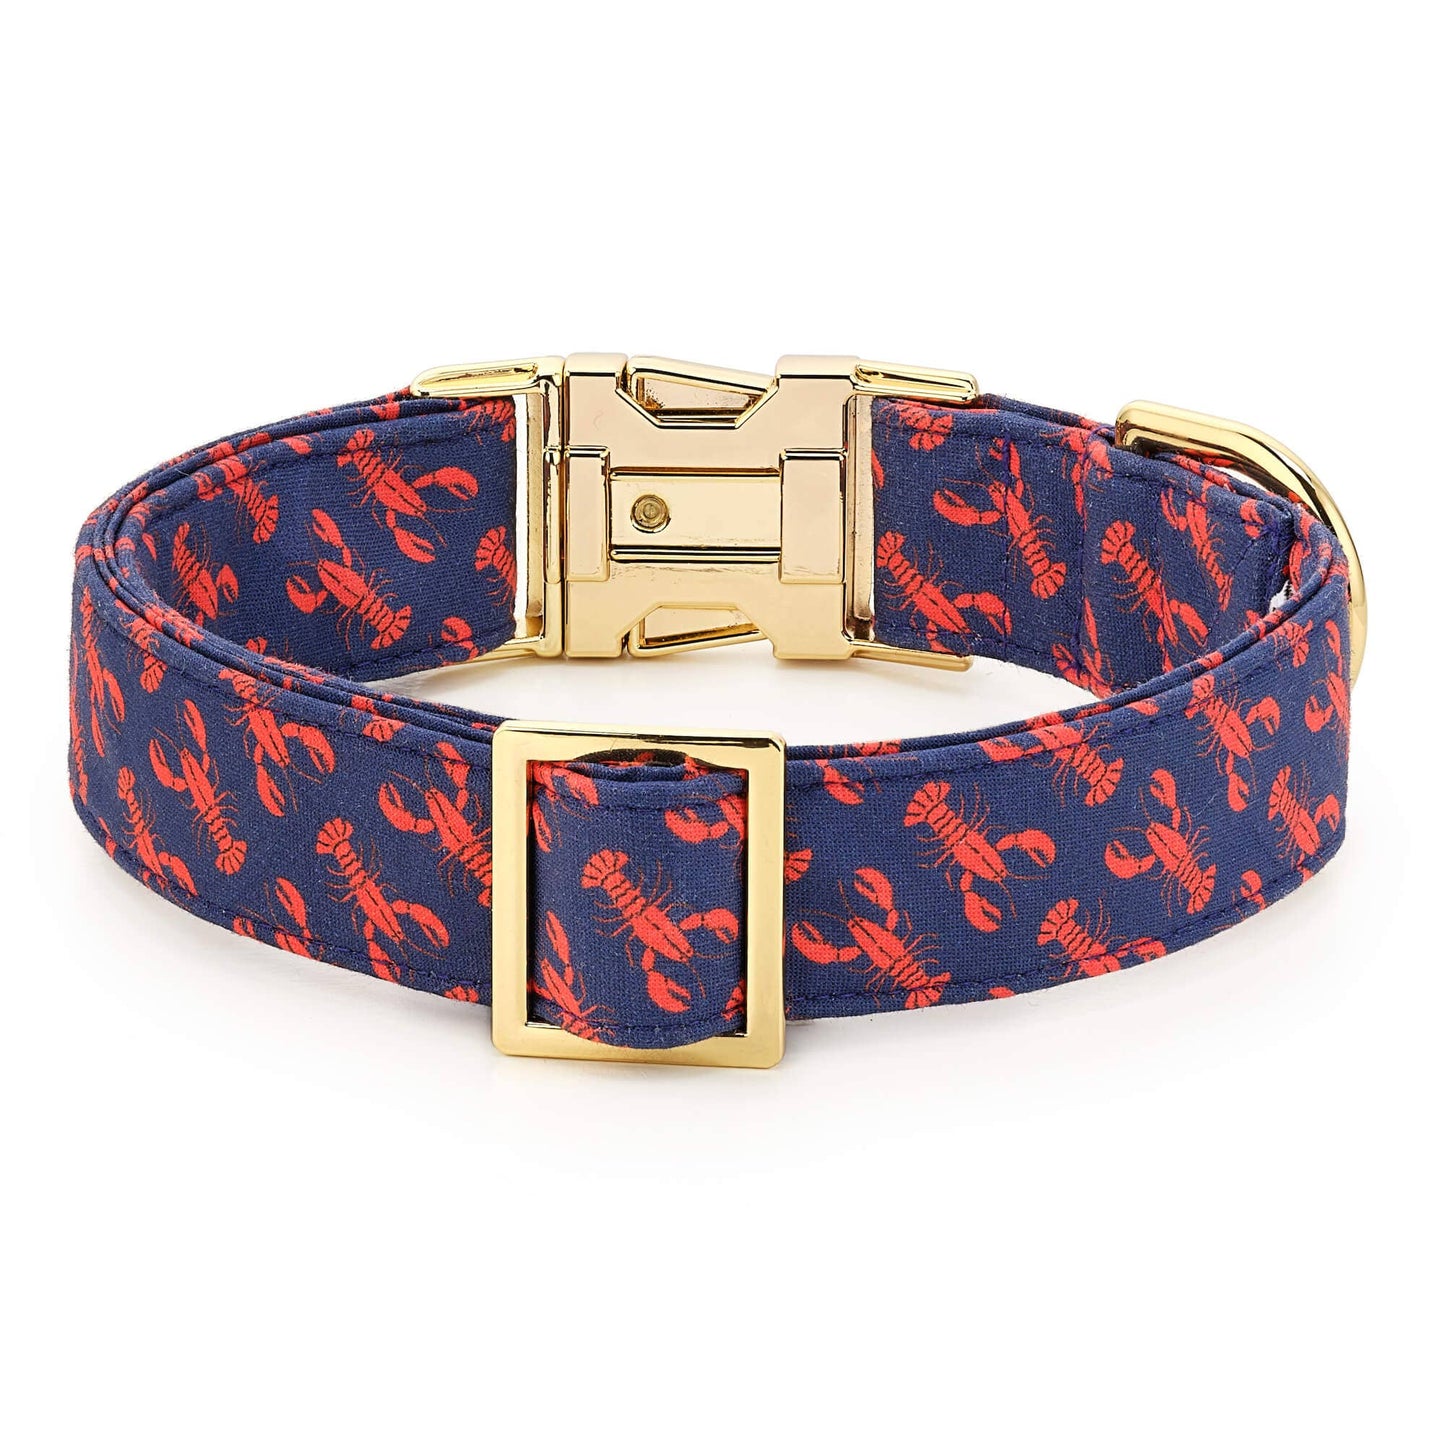 Catch of the Day Navy Dog Collar